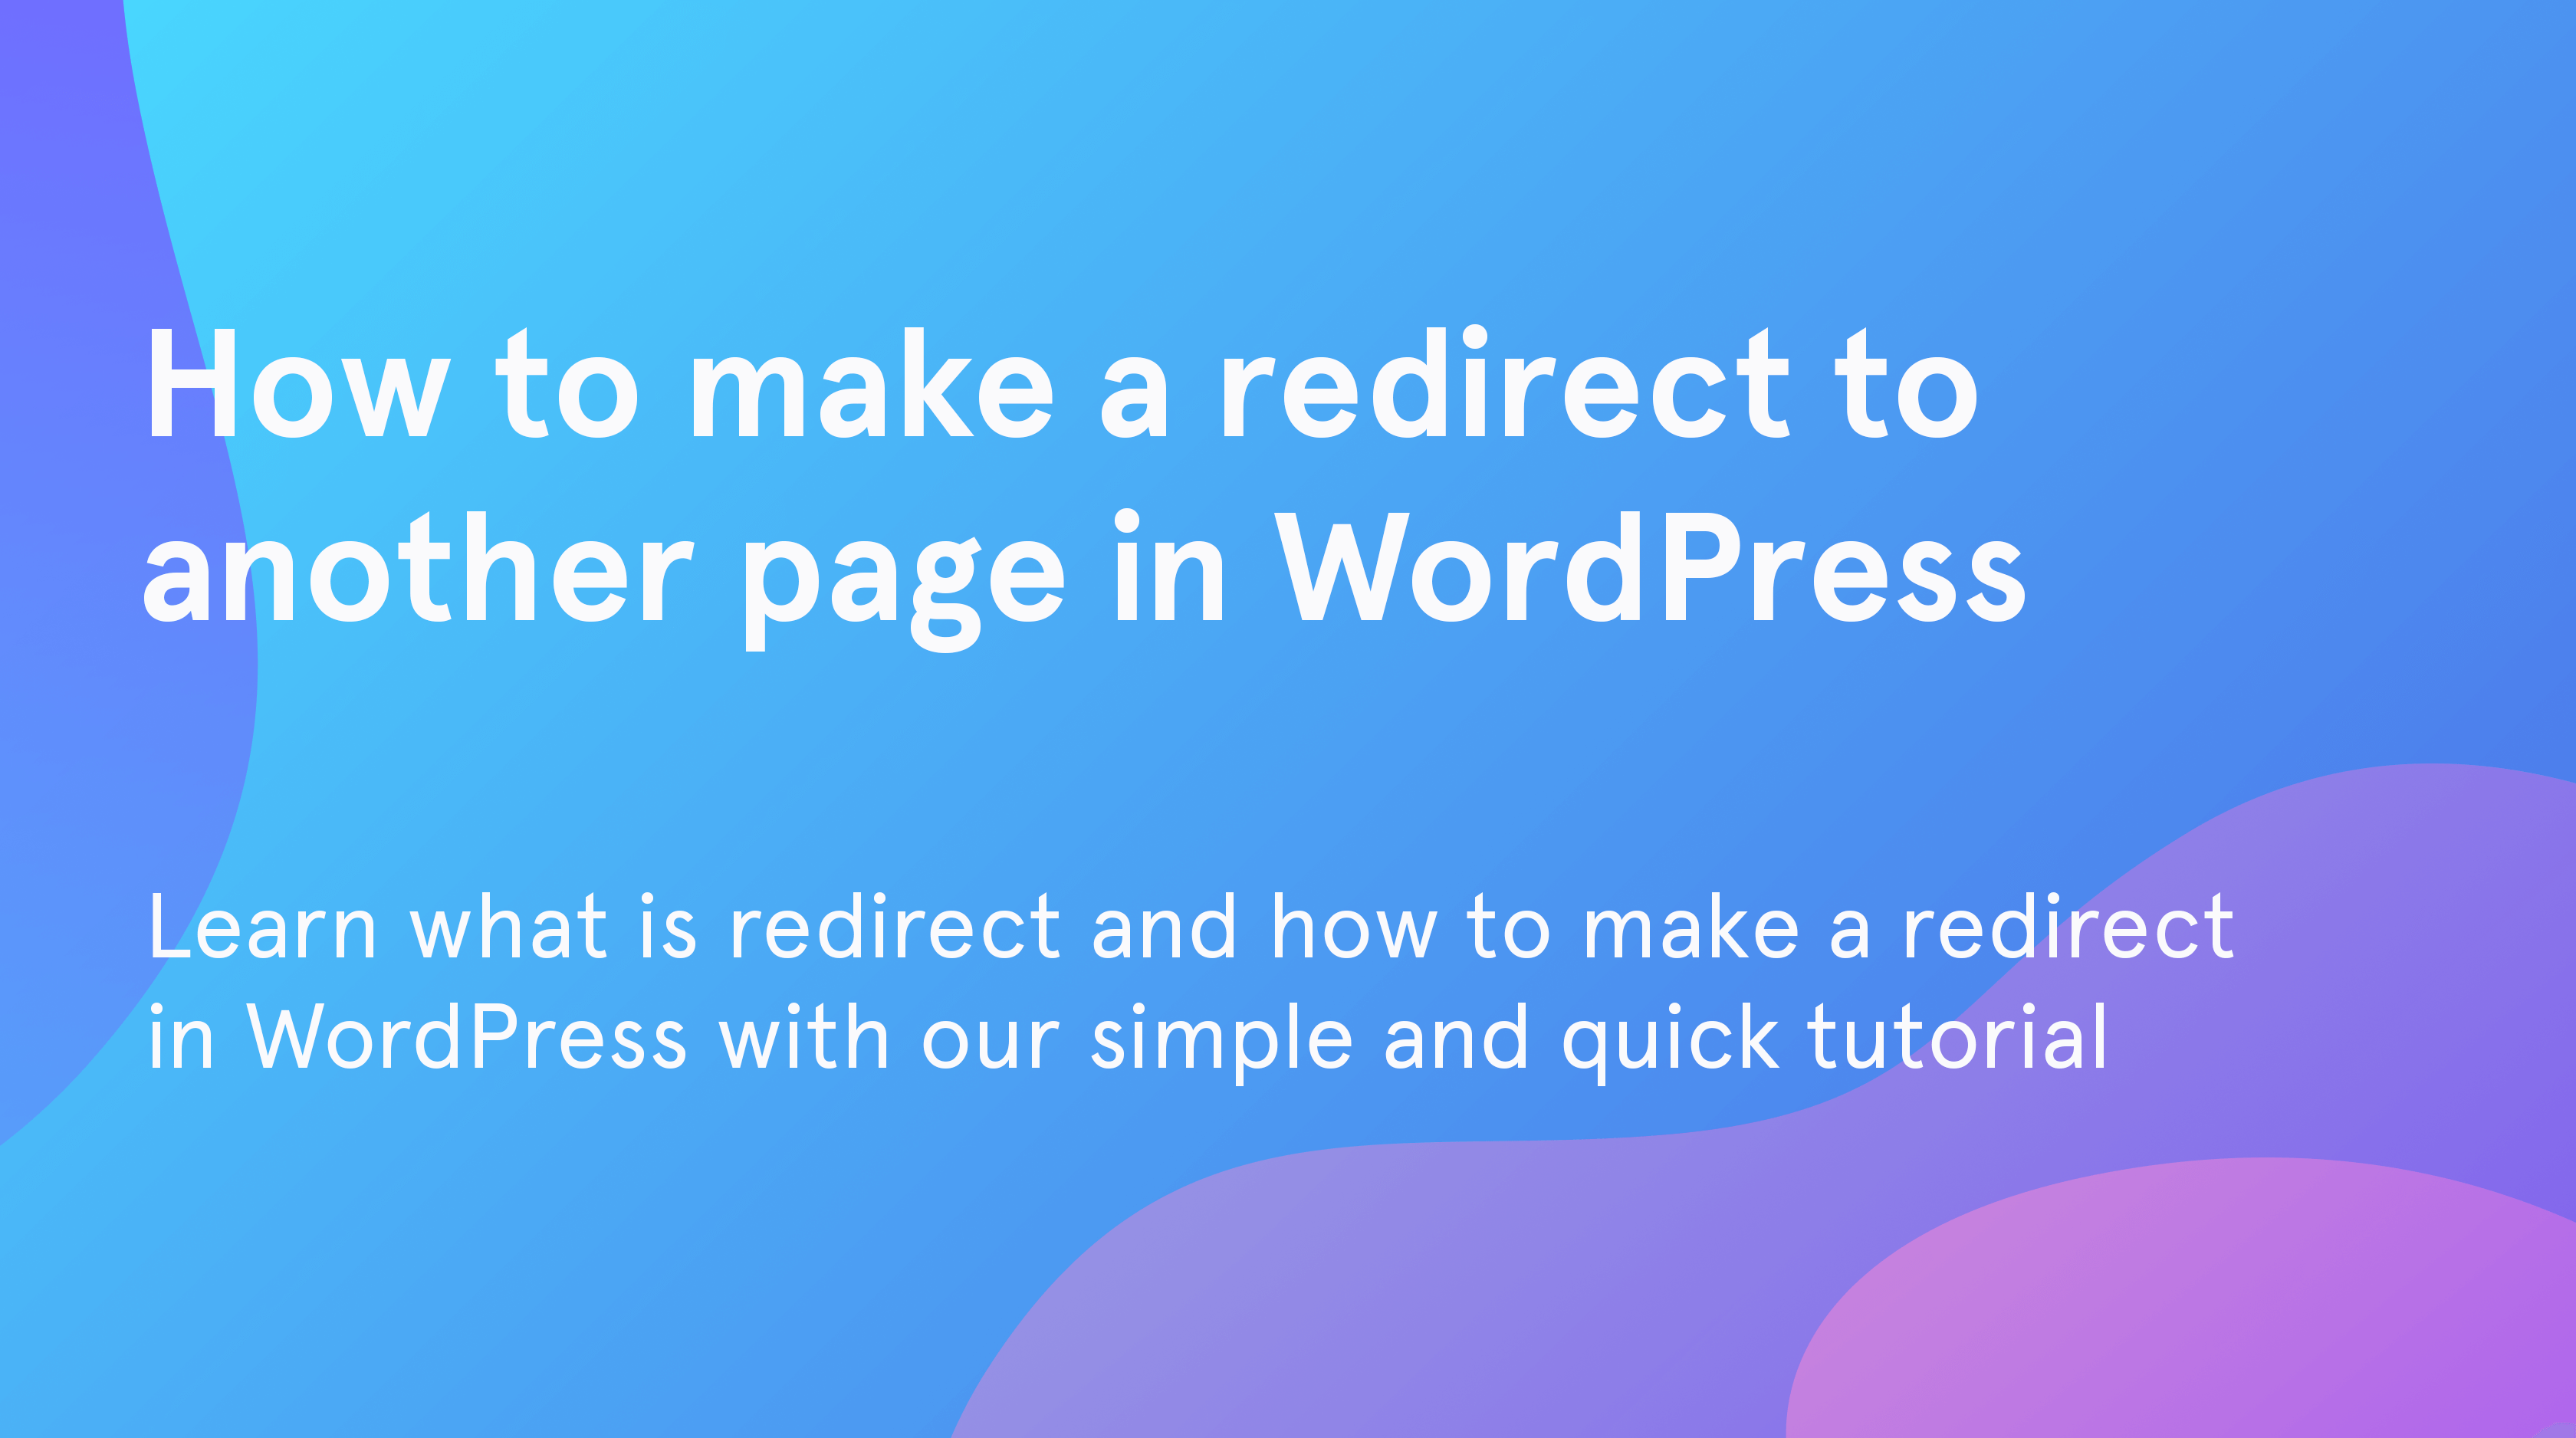 How to make a redirect to another page in WordPress